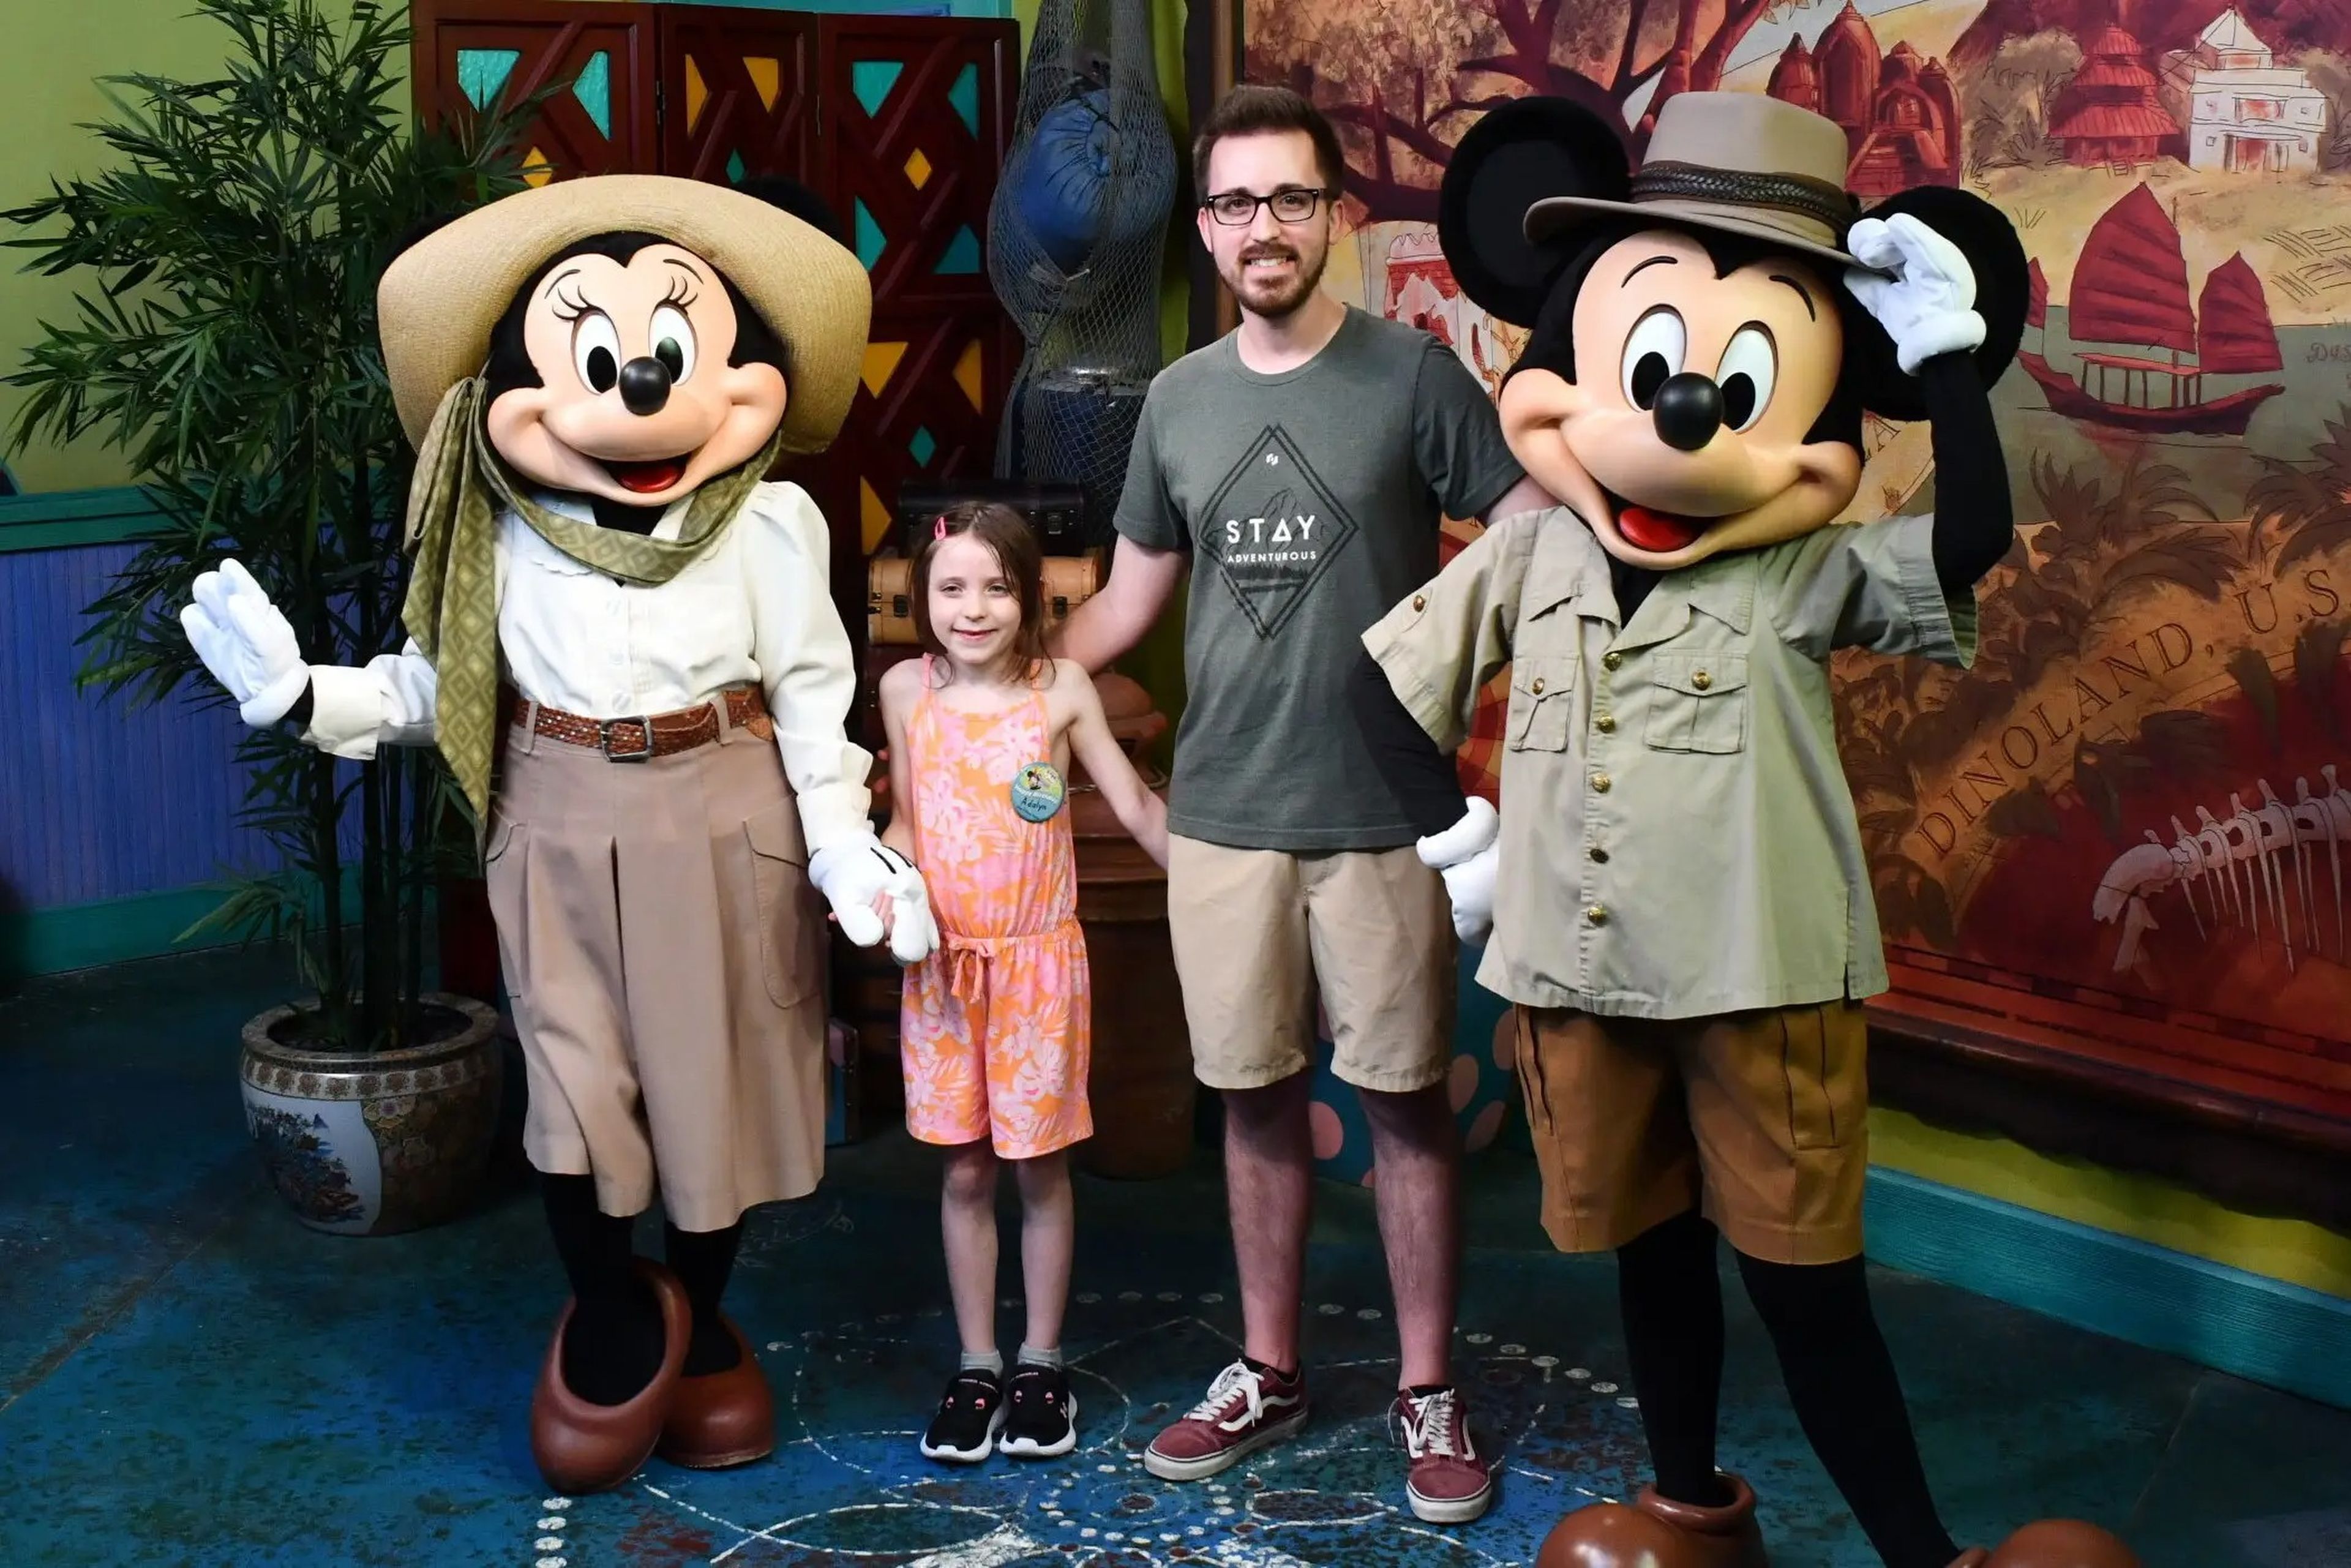 Kyle Werly and his daughter with Mickey and Minnie Mouse.